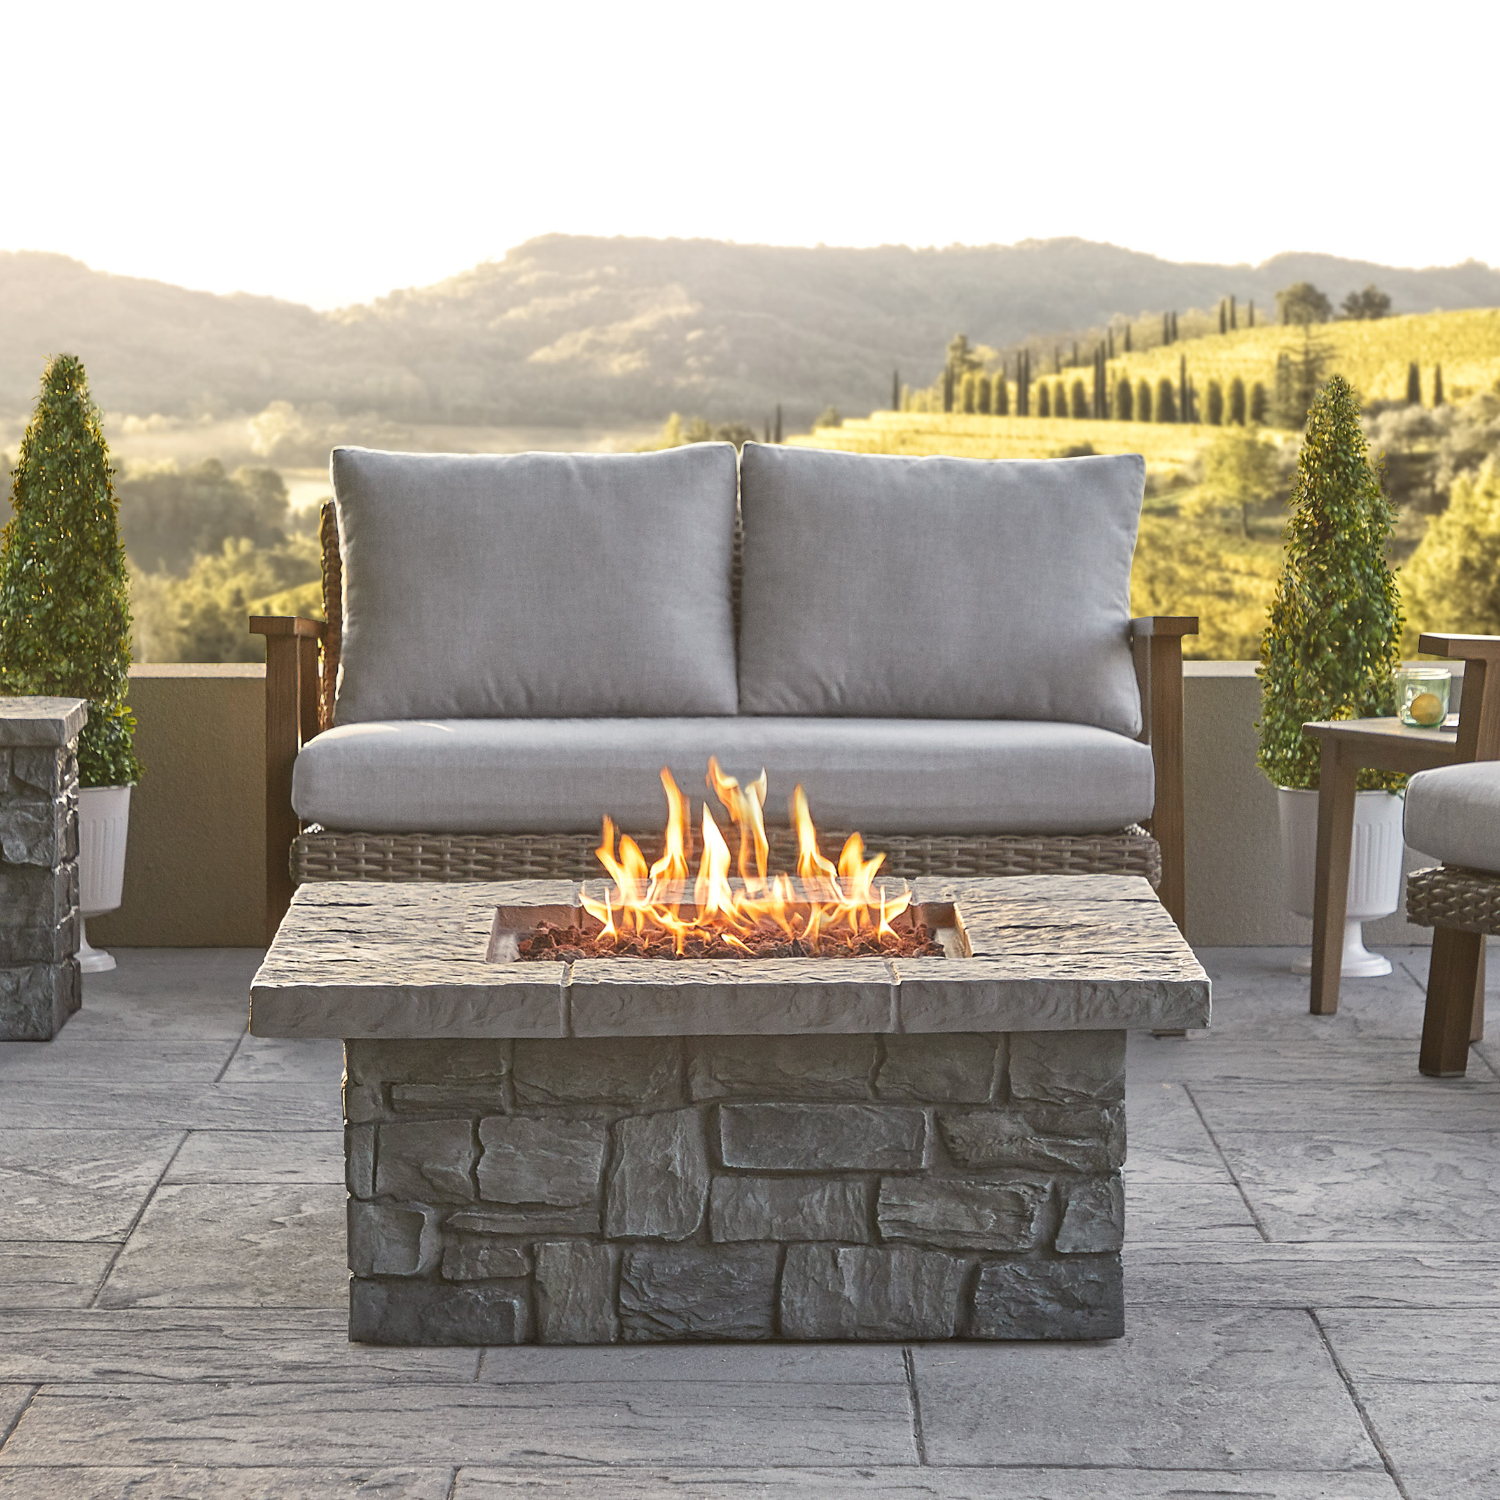 Gry Sedona Square Propane Fire Table, Convert Propane Fire Pit To Natural Gas